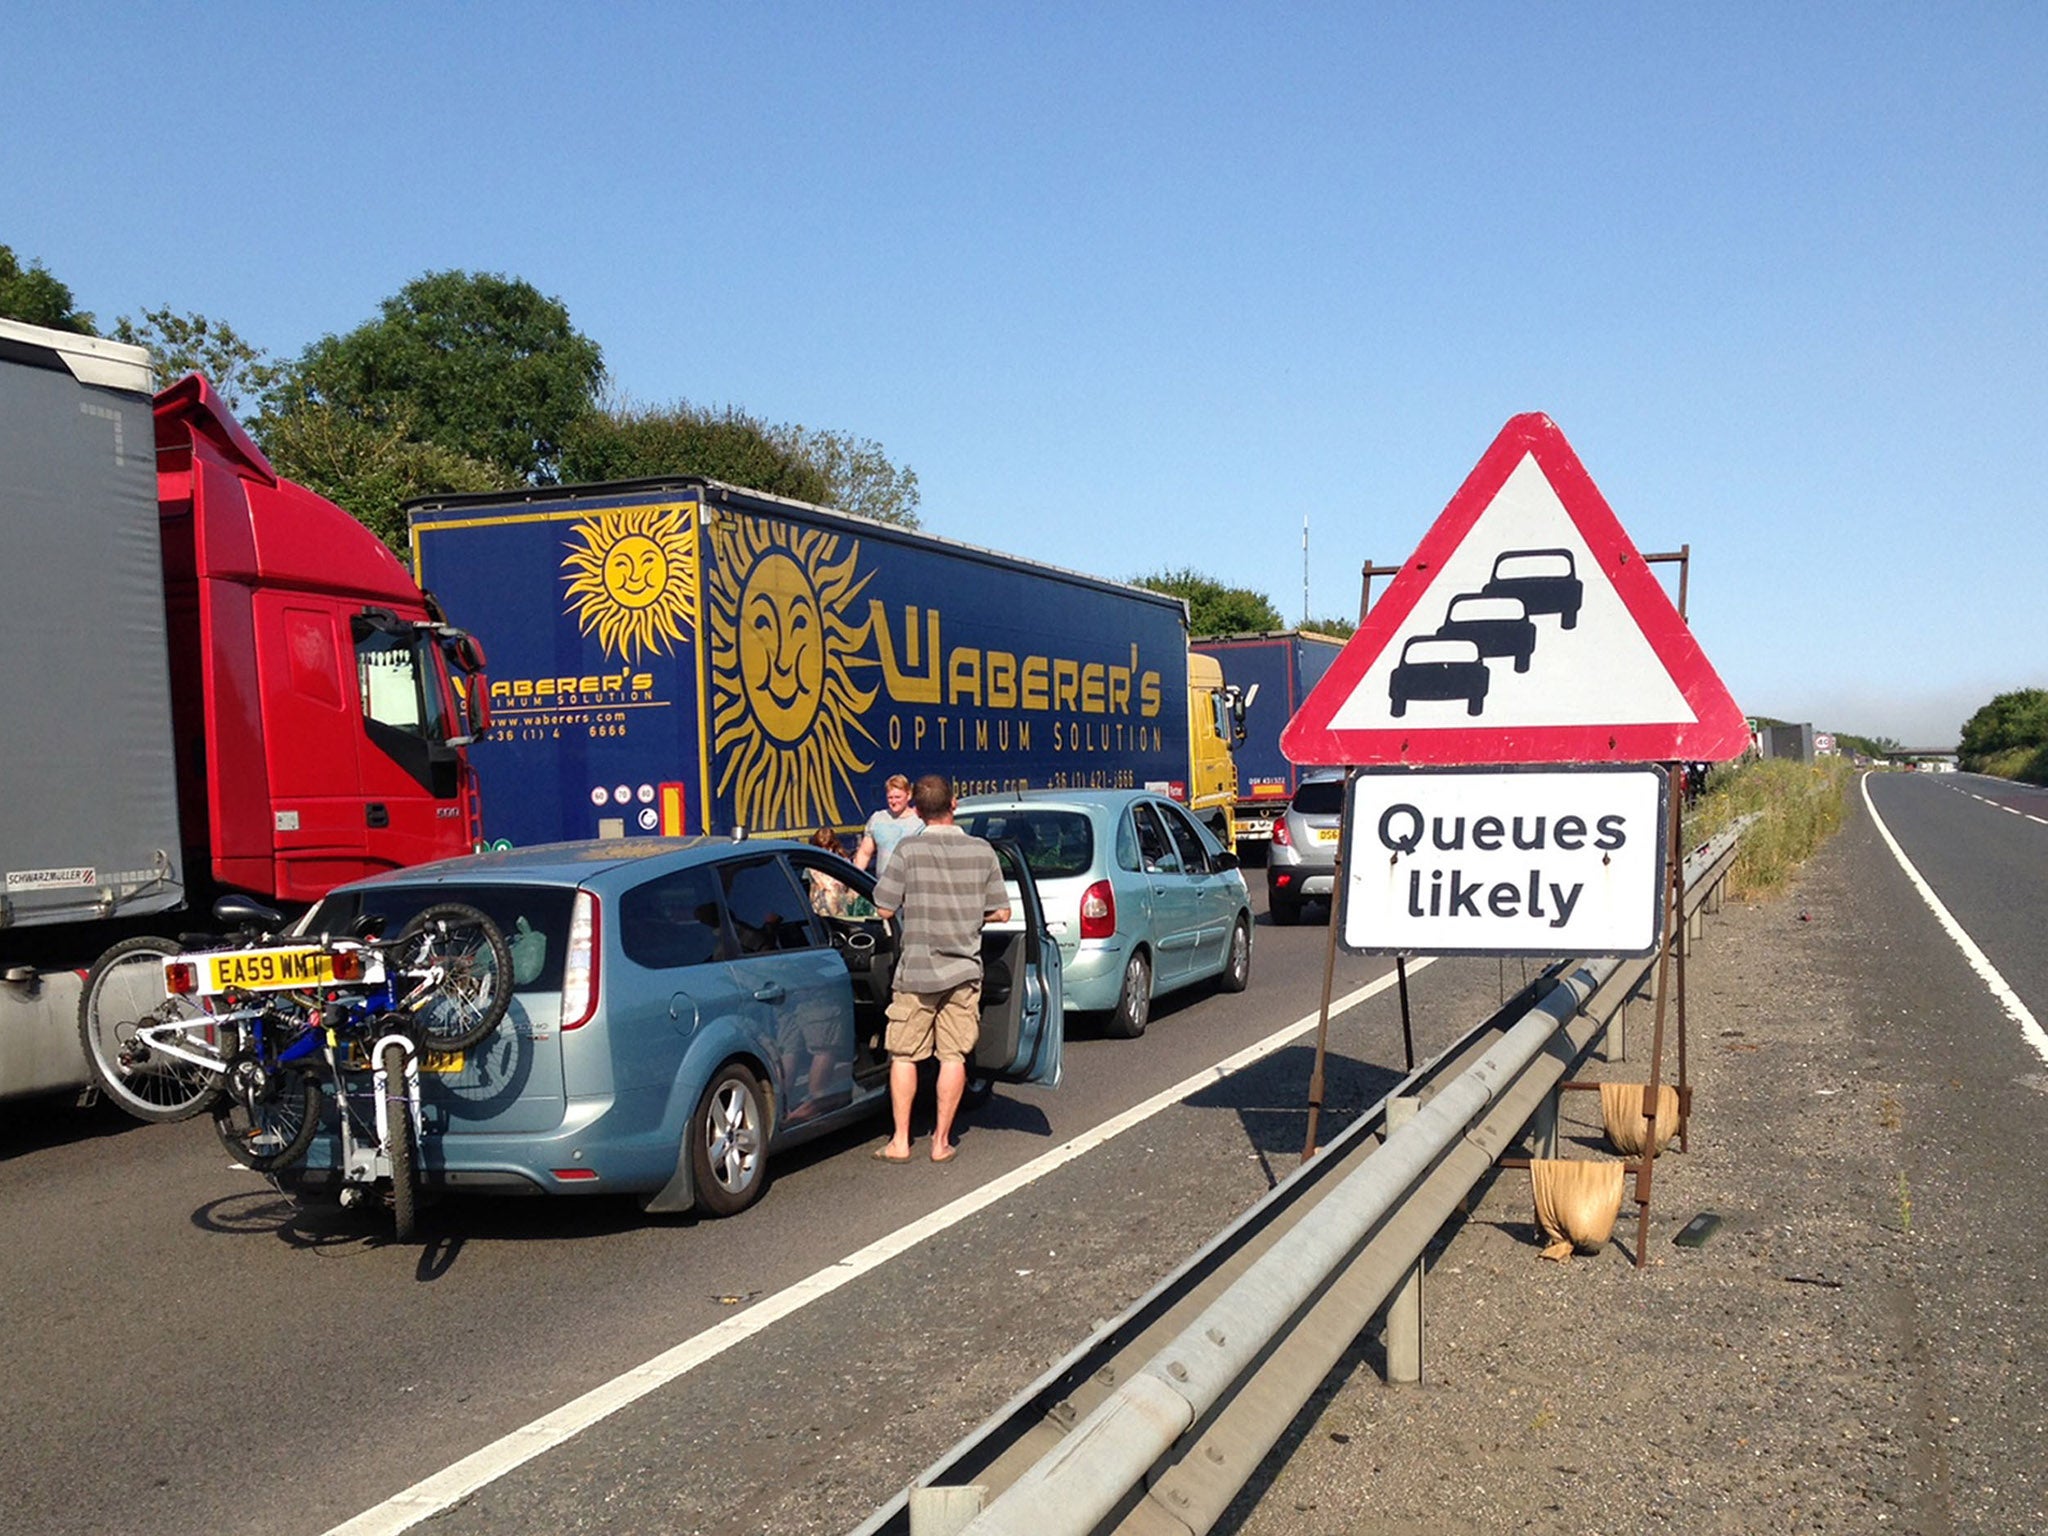 The queue of traffic at the port of Dover covered 12 miles of road over the weekend